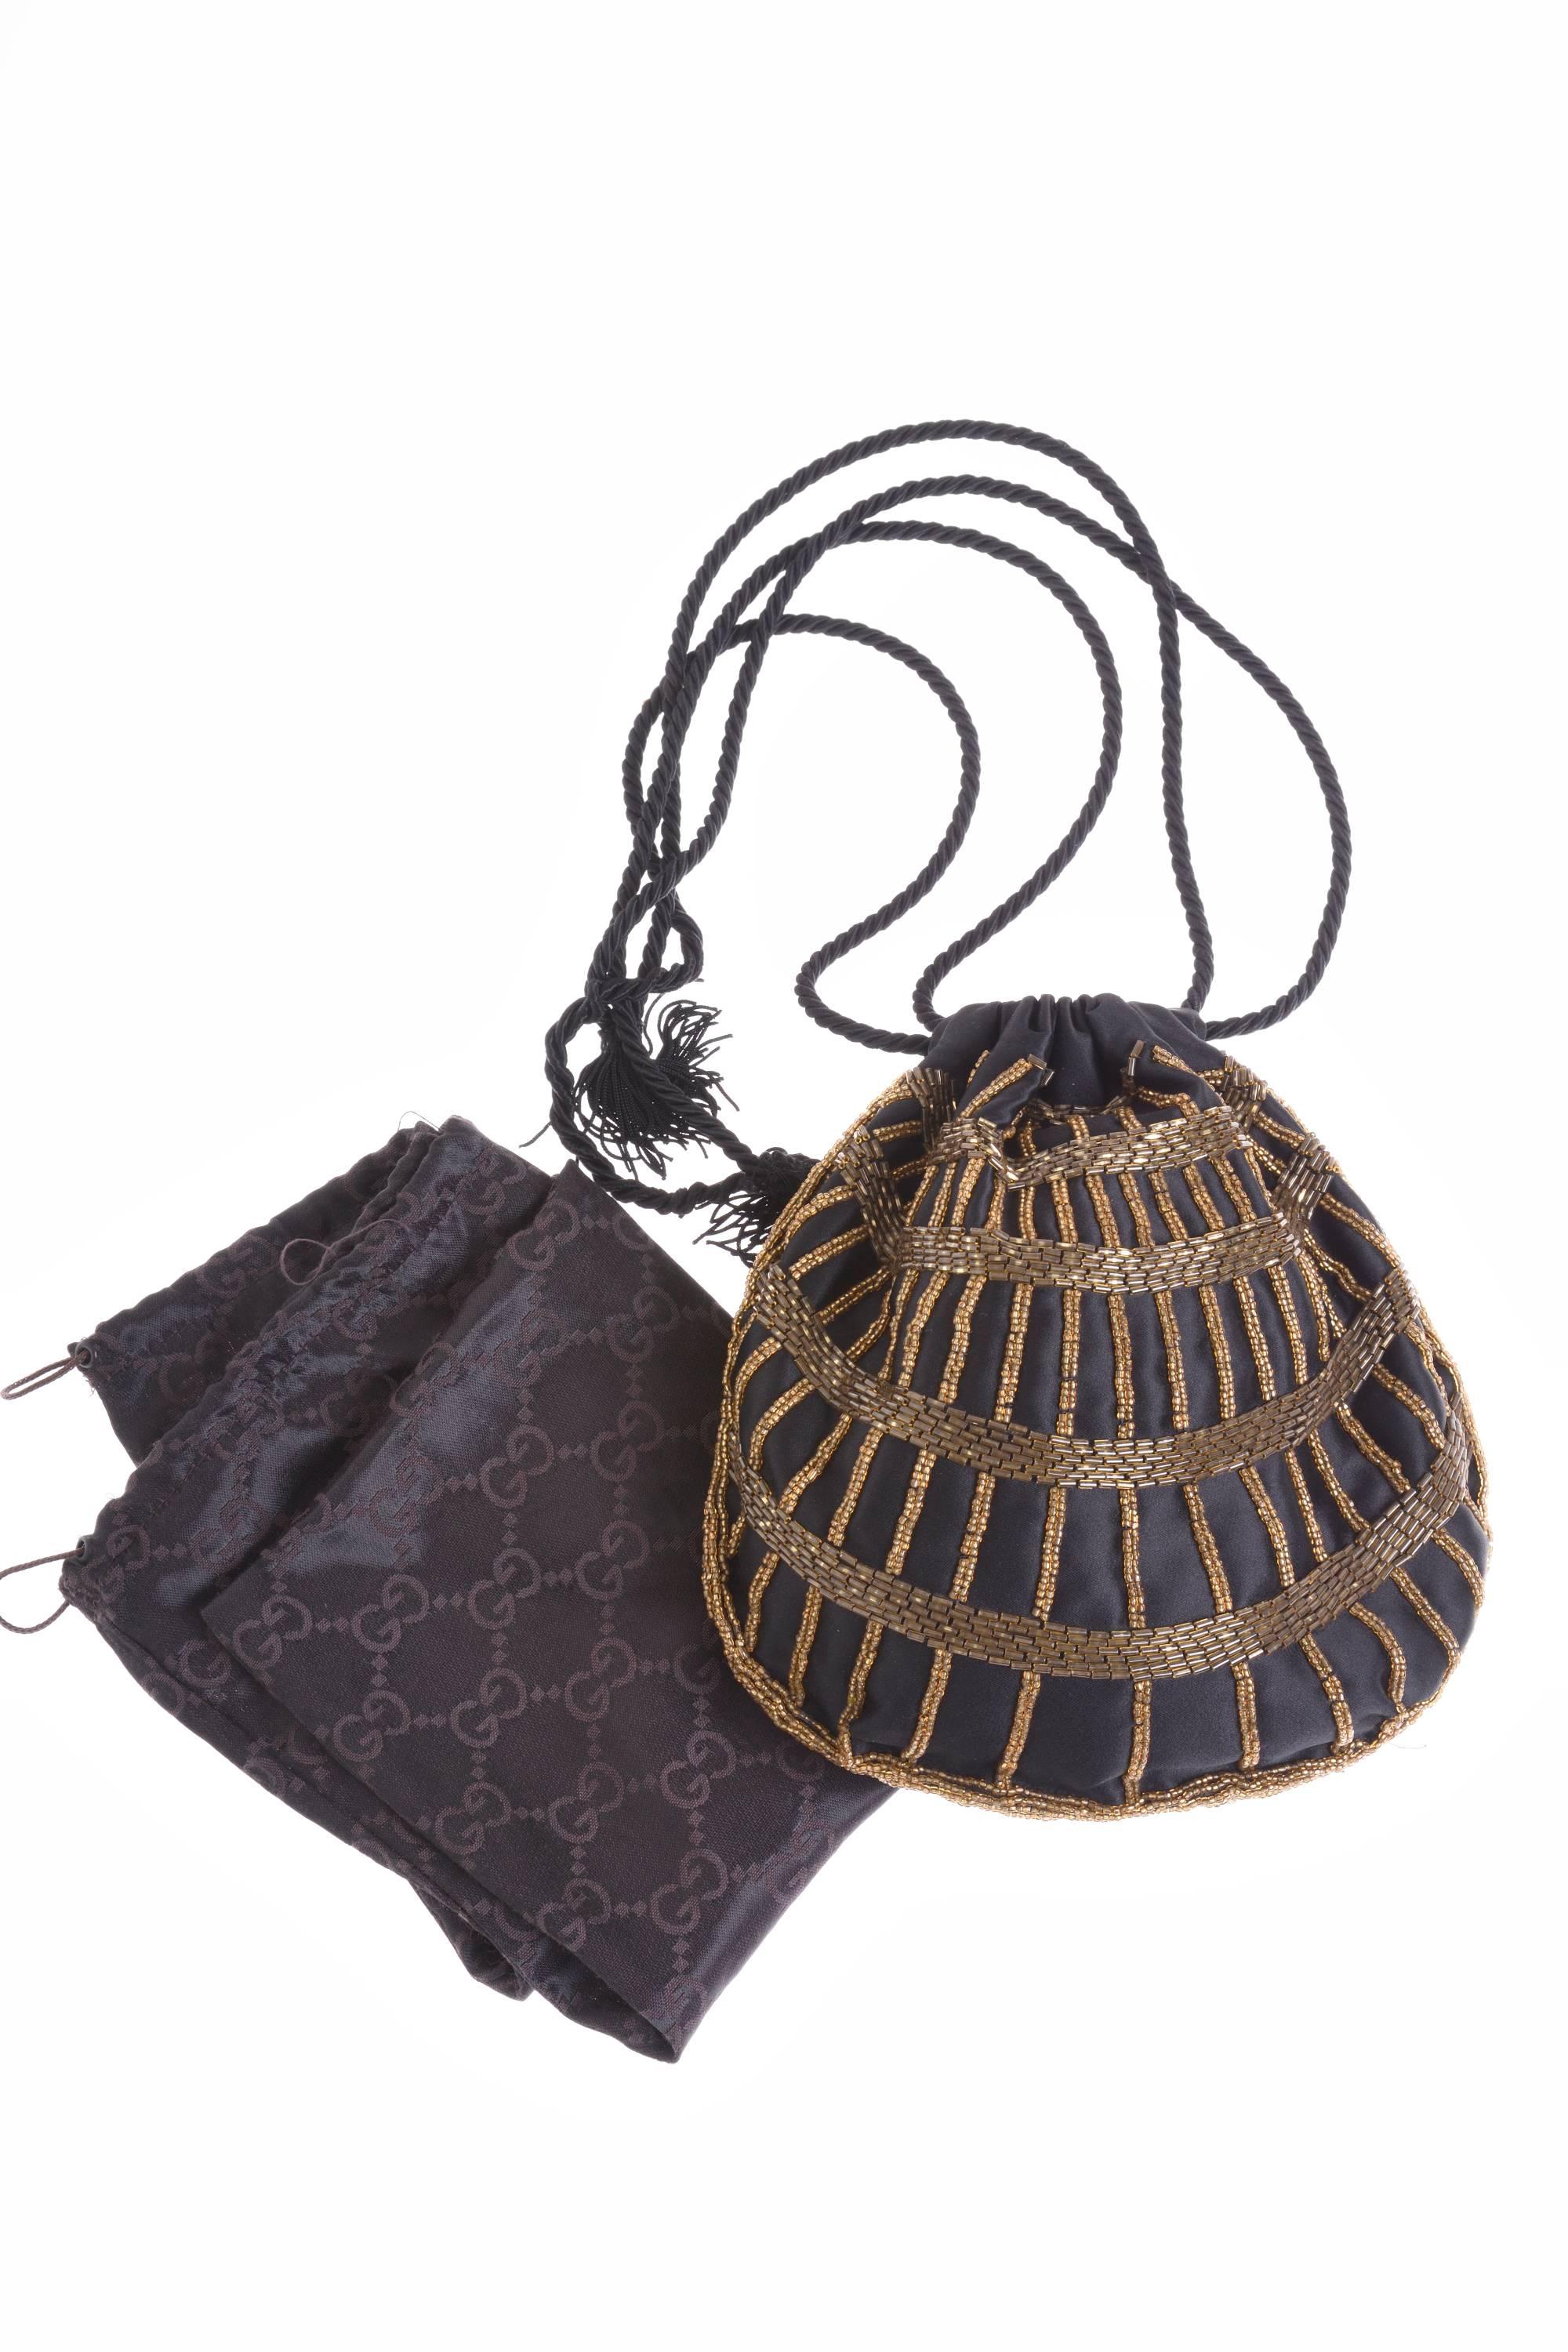 This stunning 1920s style Gucci drawstring bucket bag is in silk satin fabric with bronze beadeds embroidered details. It has satin lined and silk cord drawstring with tassels. It's included the logo dusty bag.
It is the must-have for a Fashion